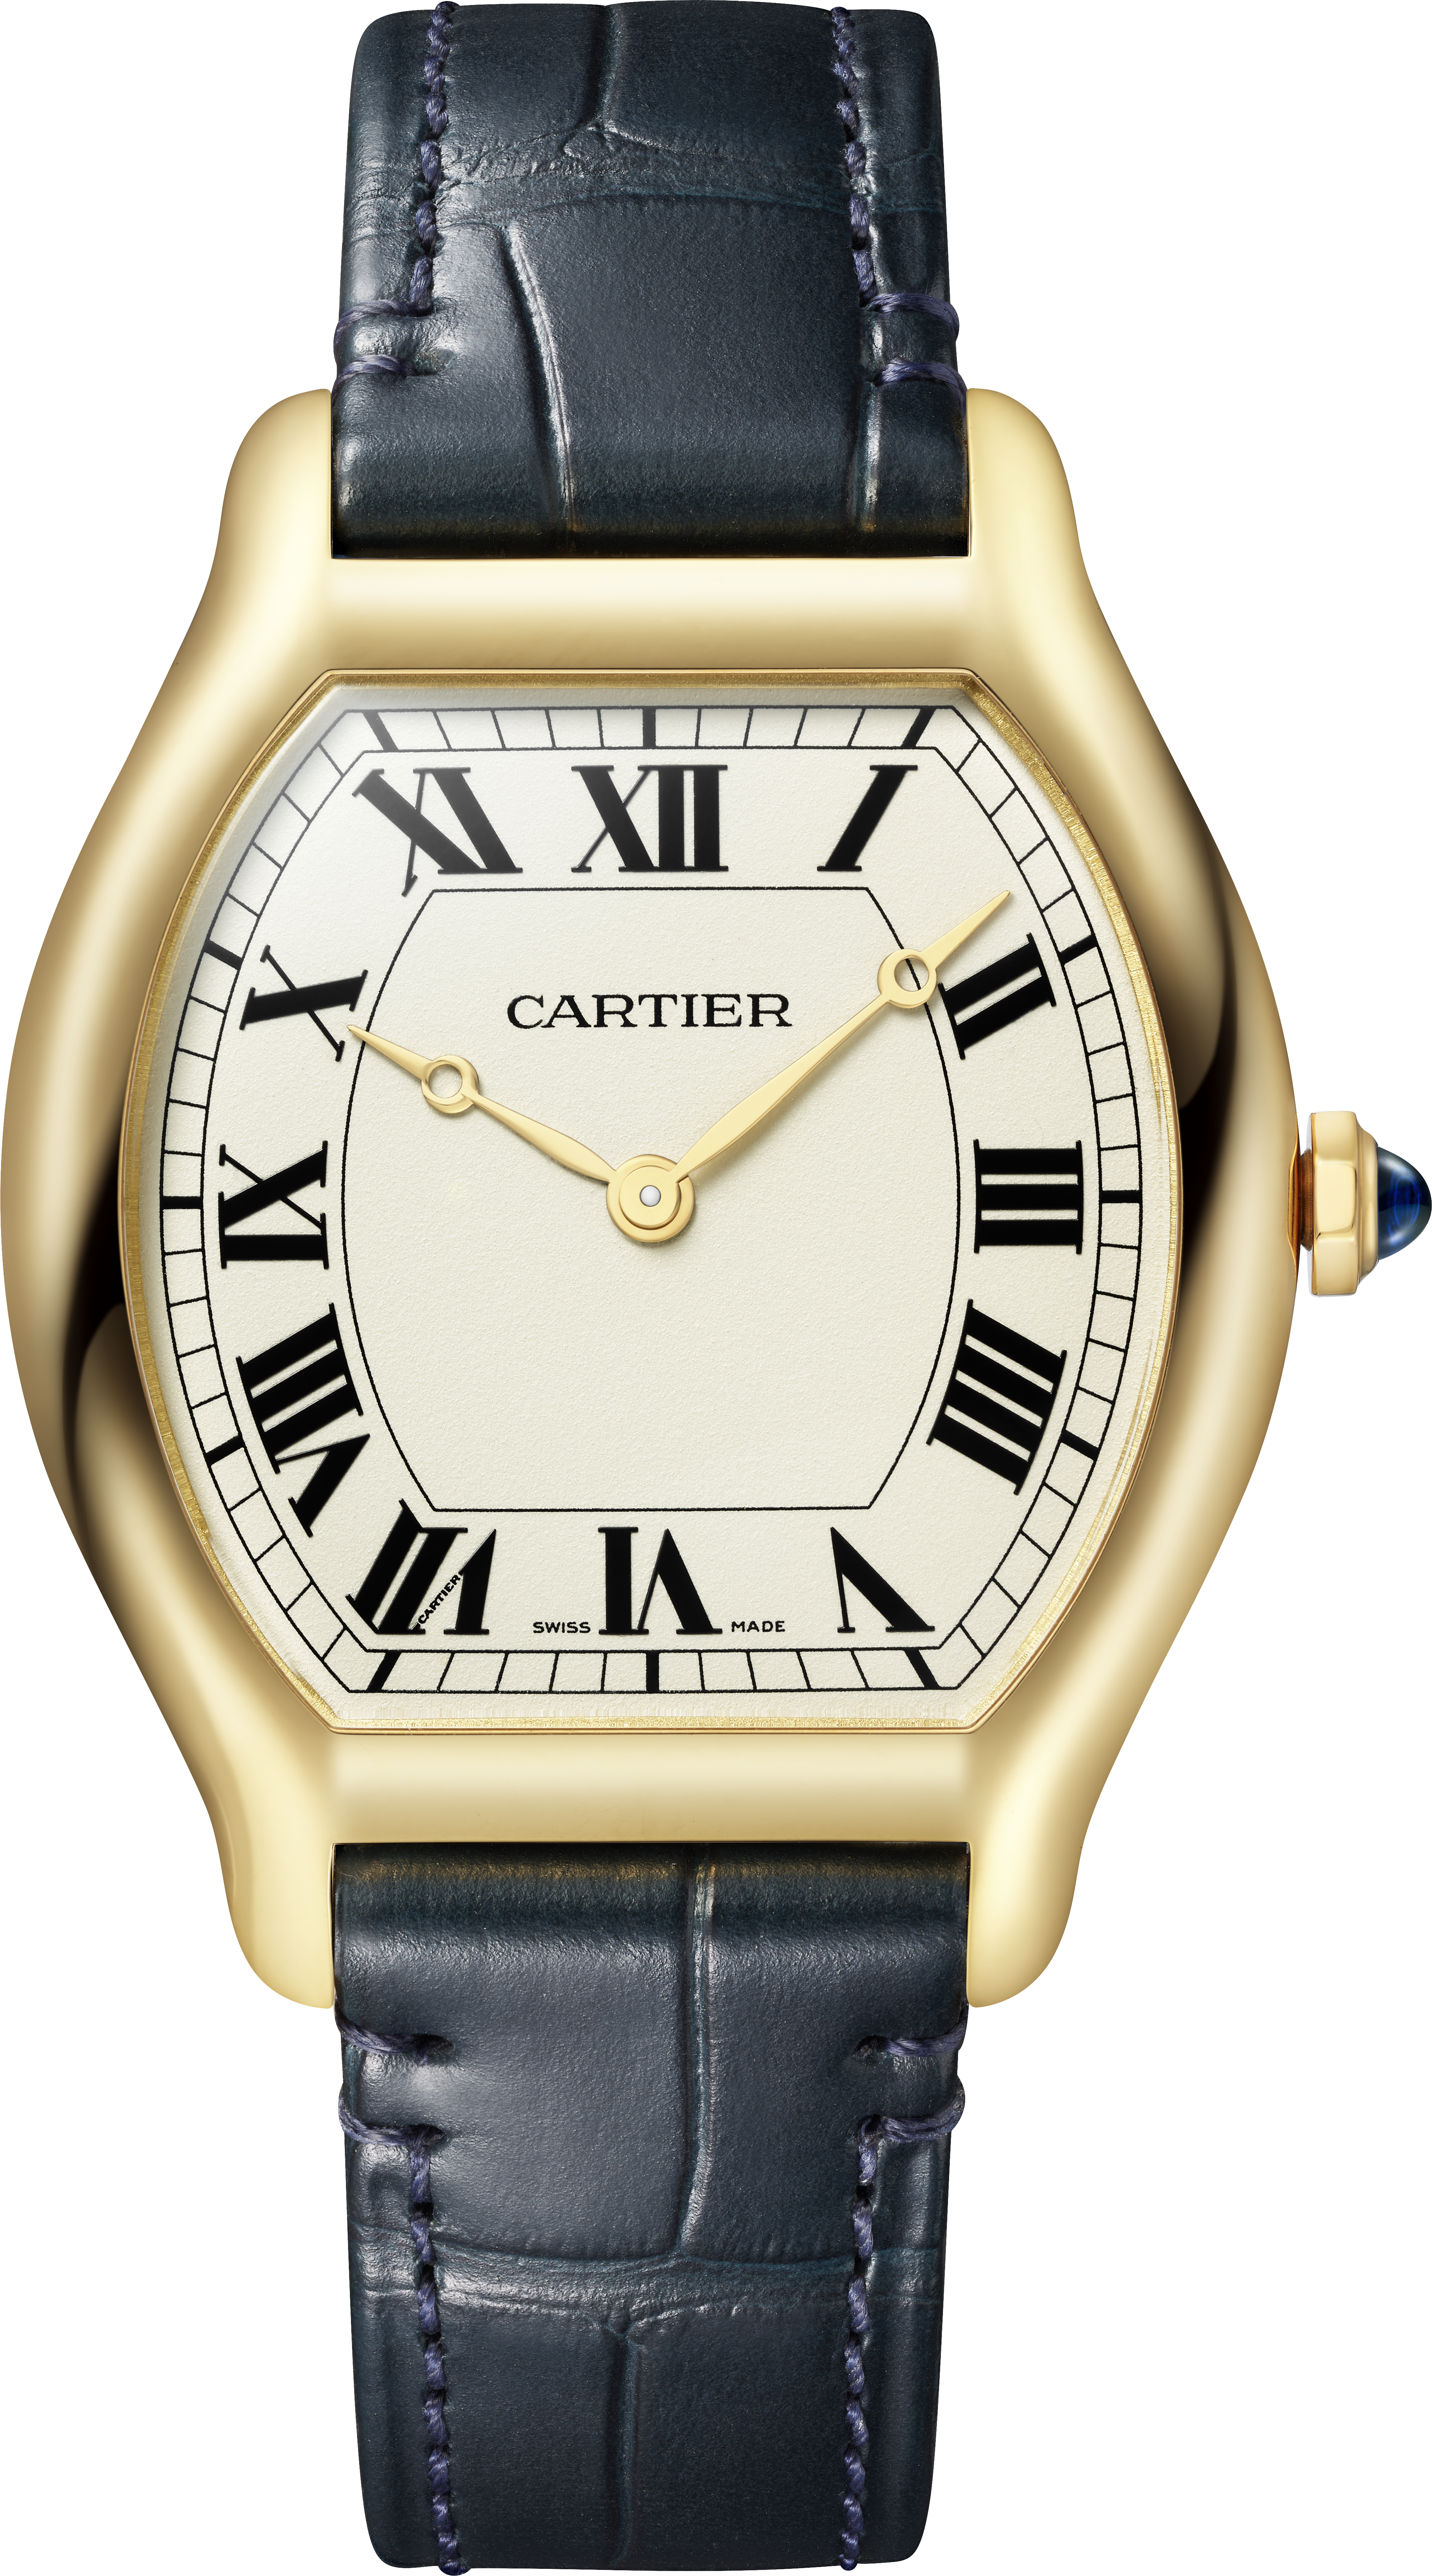 Cartier Tortue - the Watchmaker of Shapes